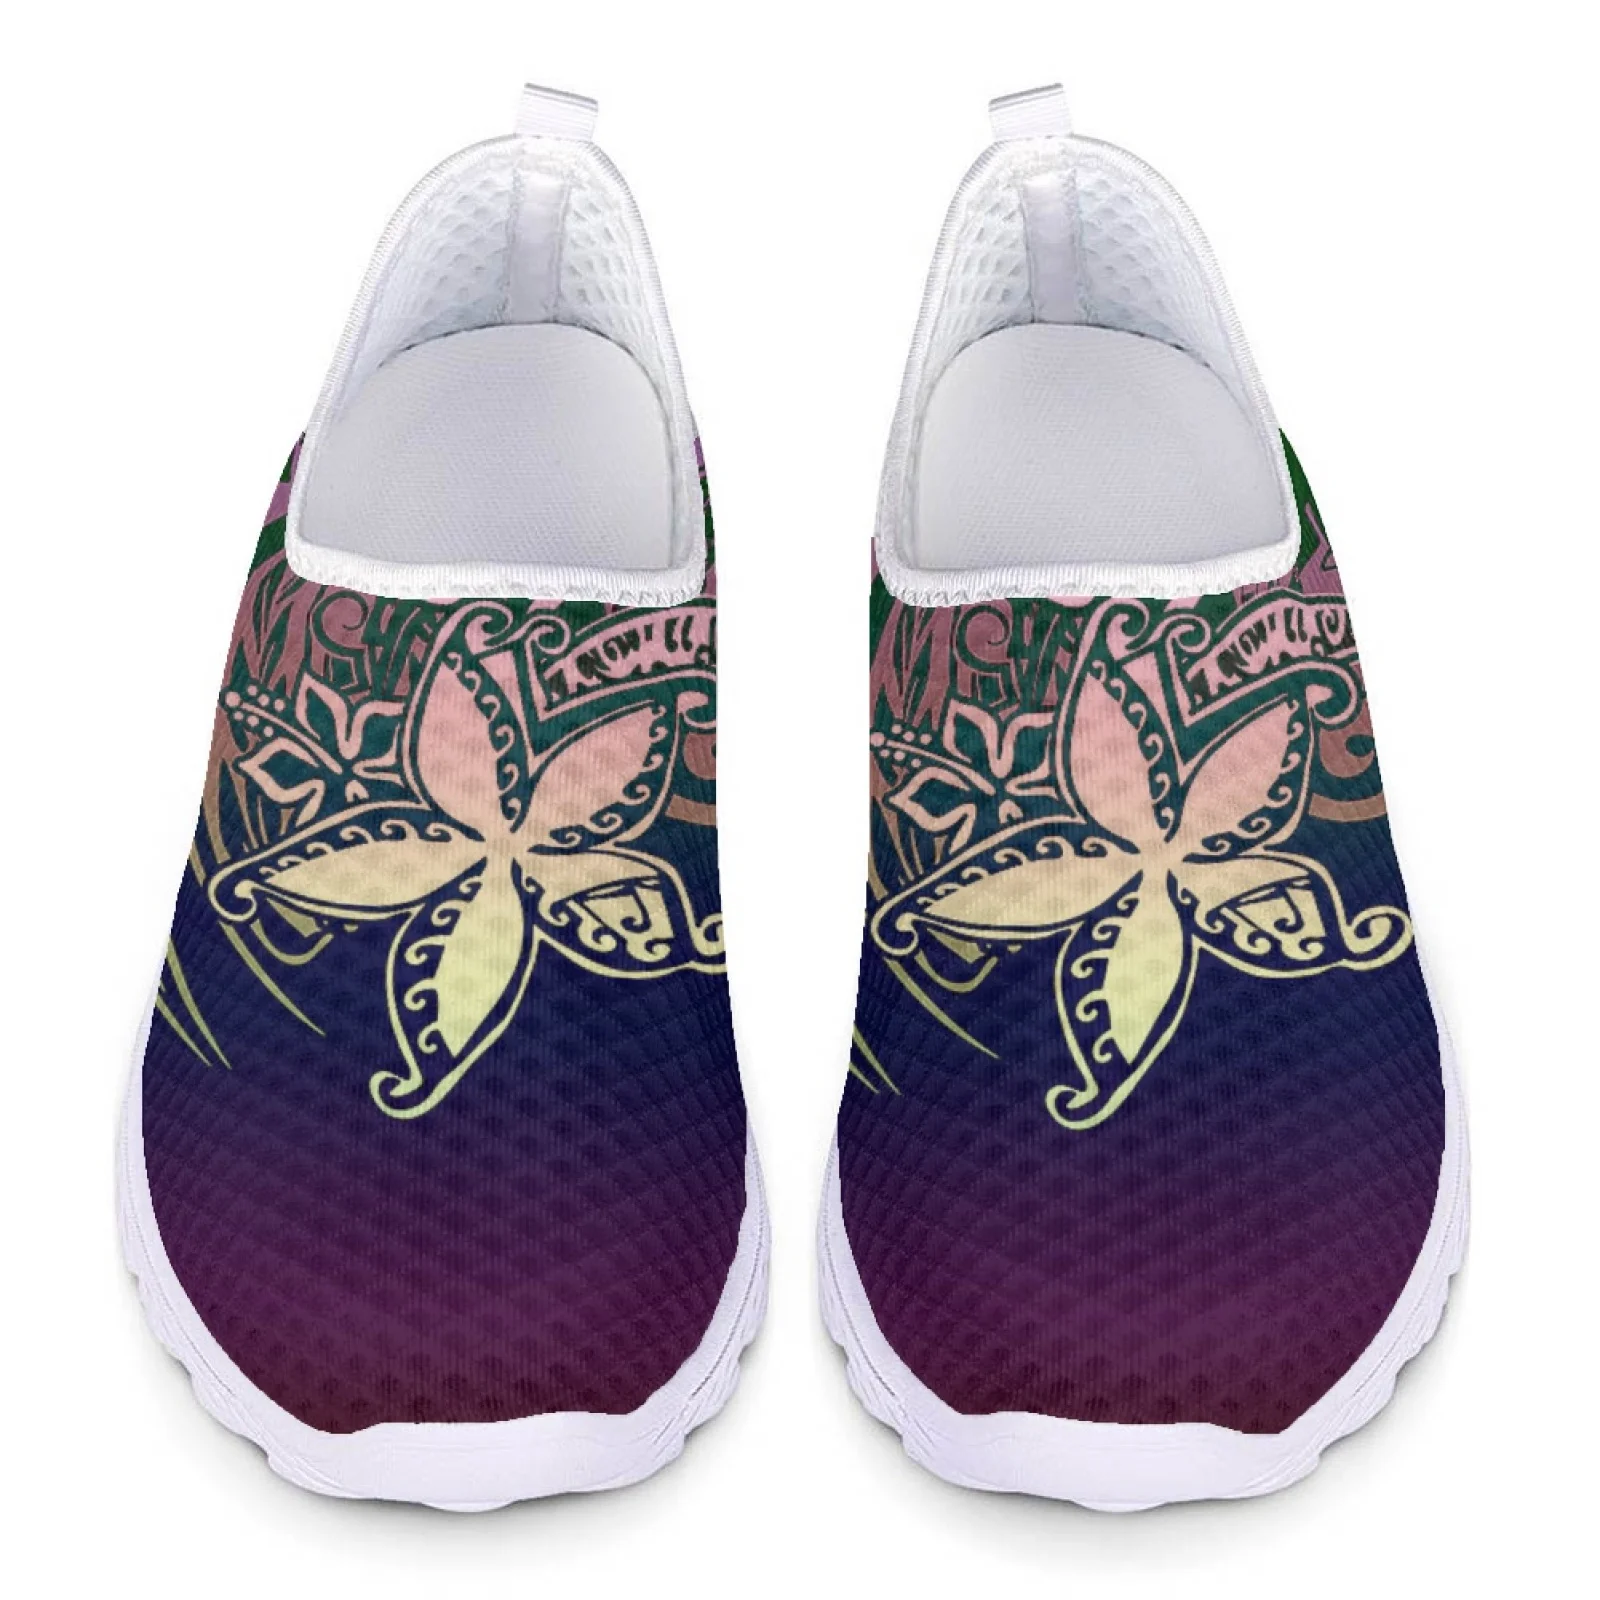 INSTANTARTS Tribal Polynesian Plumeria Flower Prints Flat Shoes for Women Light Slip-on Casual Loafers Summer Cool Mesh Sneakers